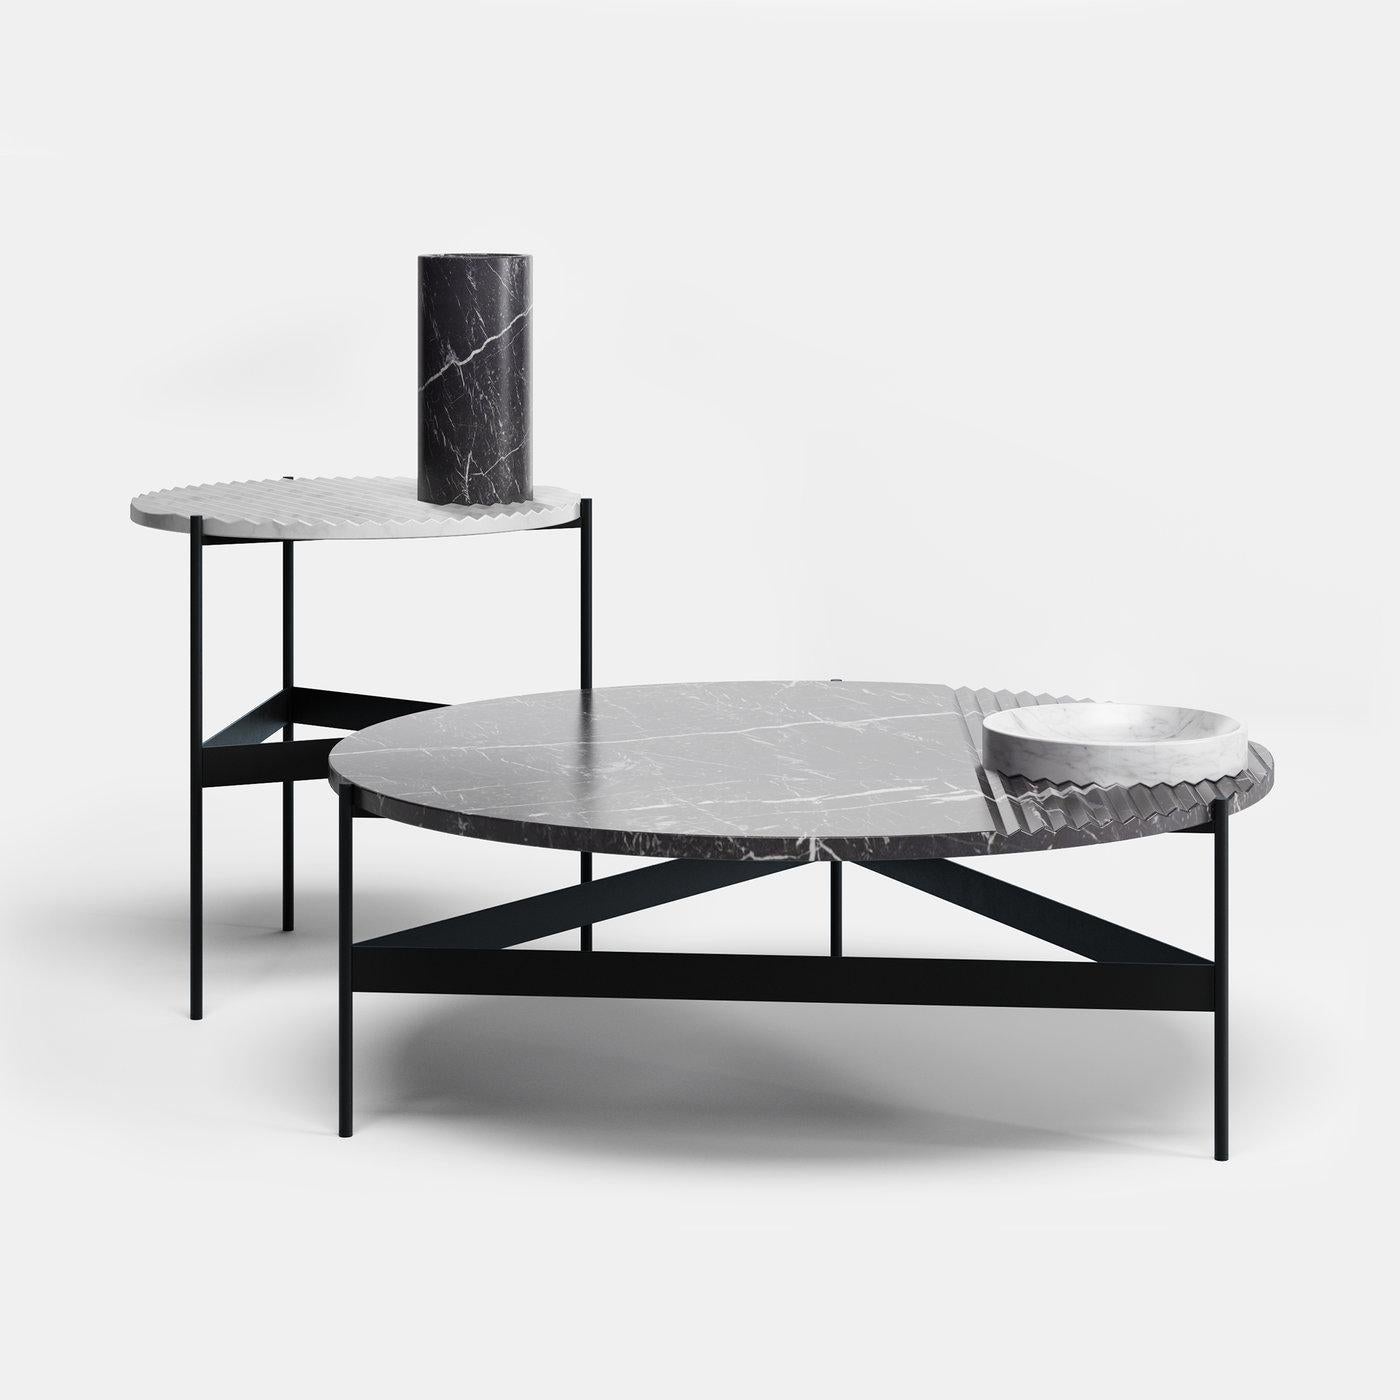 This coffee table stands out for the textural irony of its thick top in black Marquina marble, whose partially knurled surface is meant to be paired with the accessories in white Carrara marble (bowl and tray) designed with a knurled surface, too.